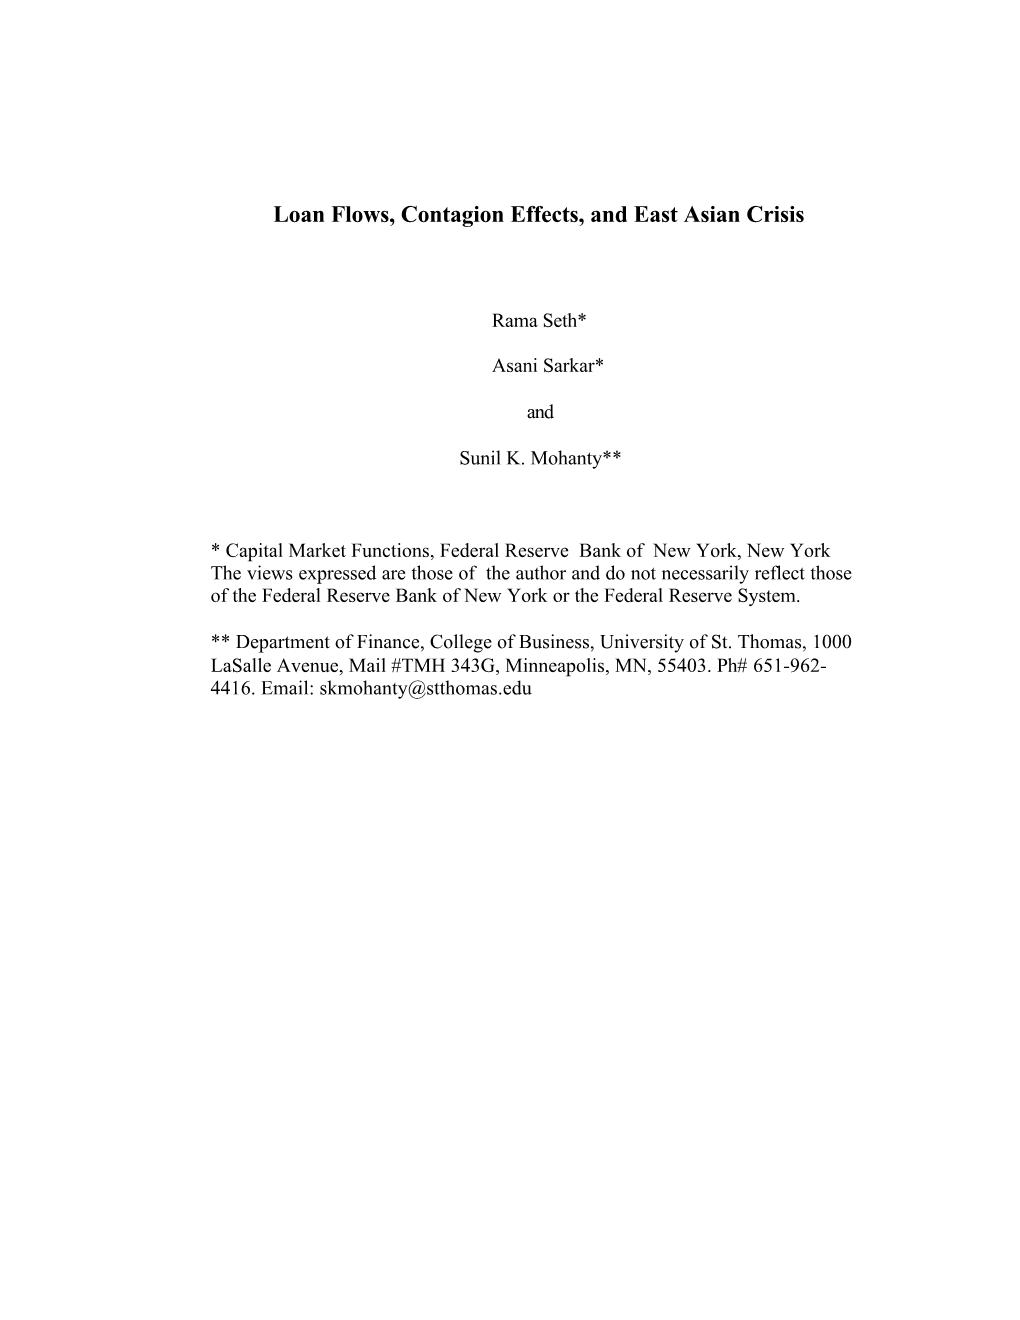 Loan Flows, Contagion Effects, and East Asian Crisis